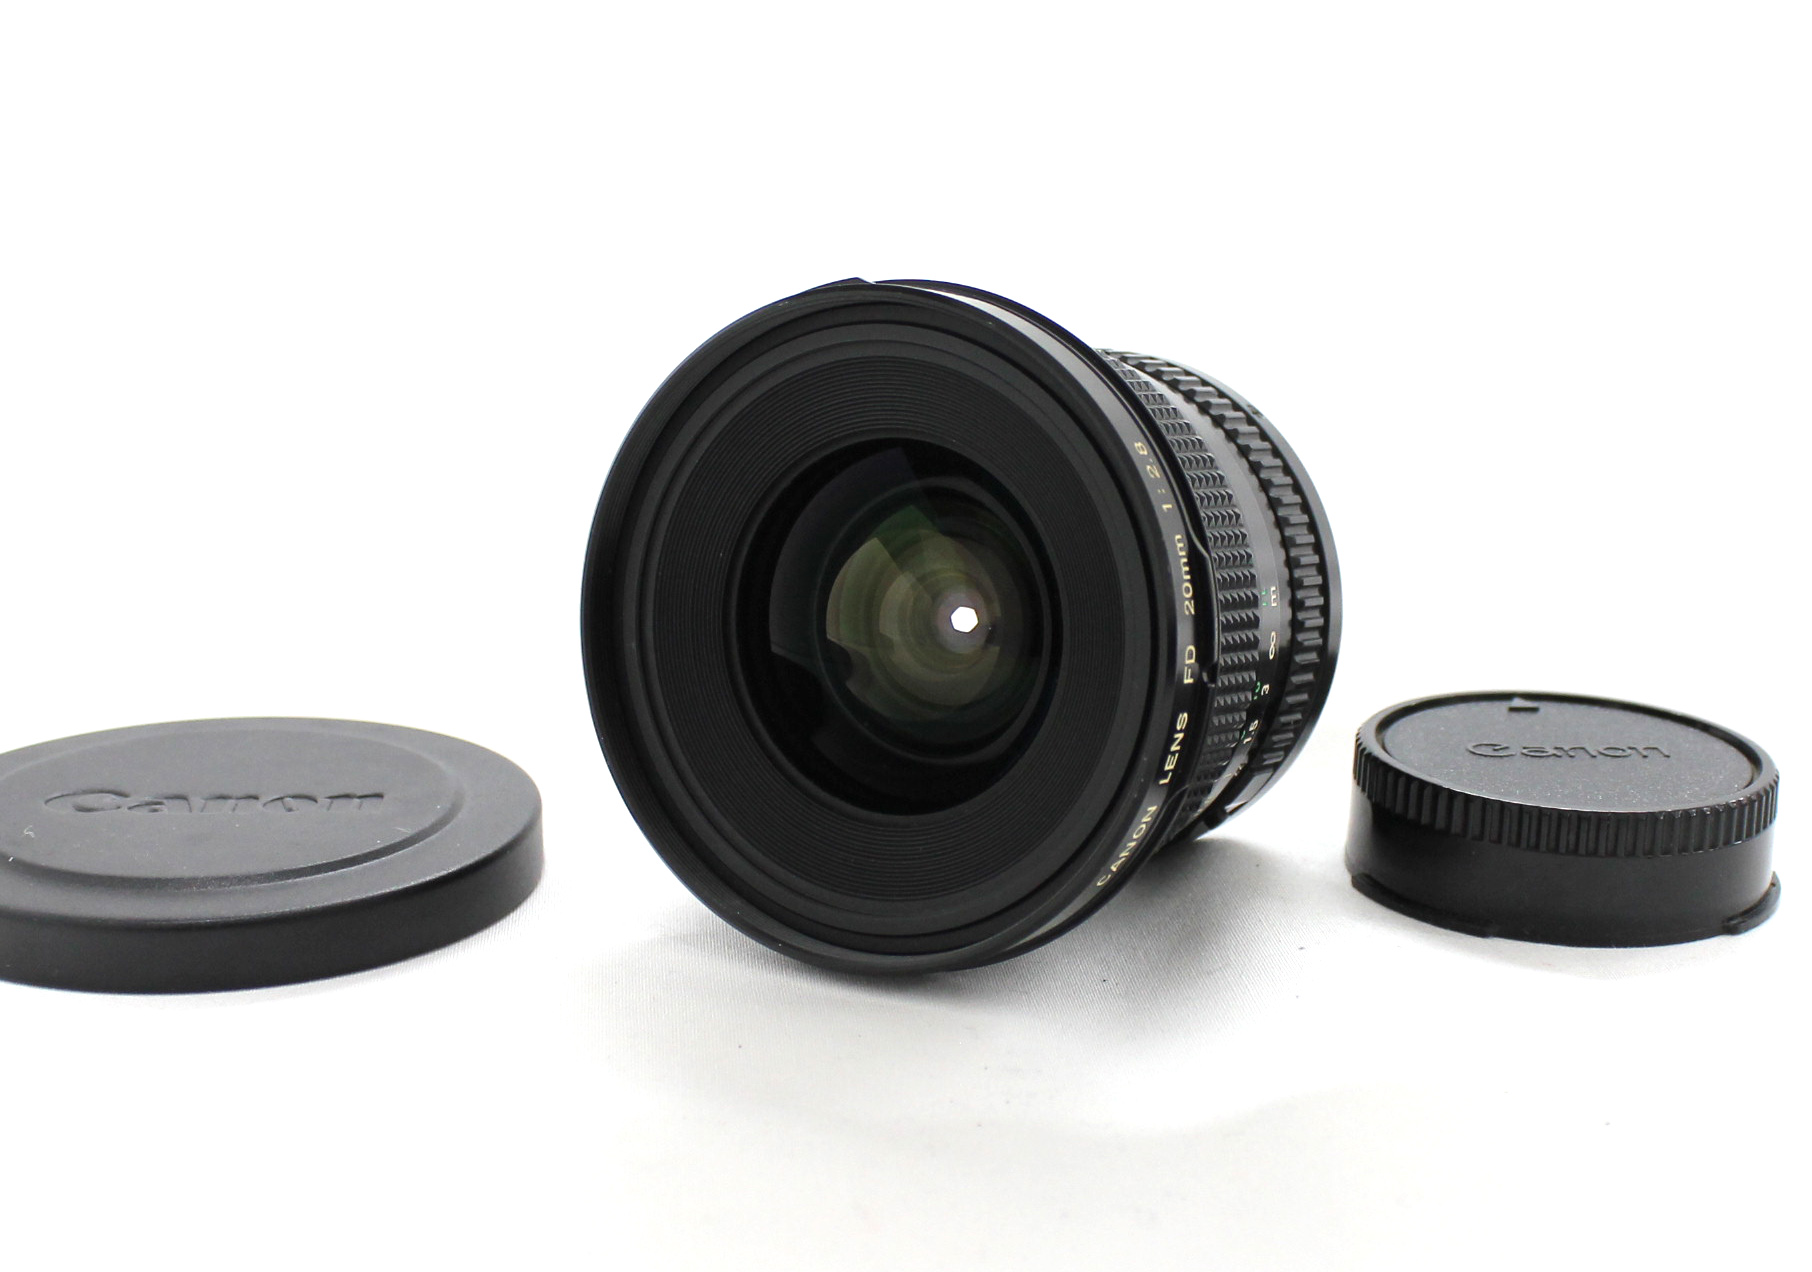 Japan Used Camera Shop | [Near Mint] Canon New FD NFD 20mm F/2.8 Wide Angle Lens from Japan